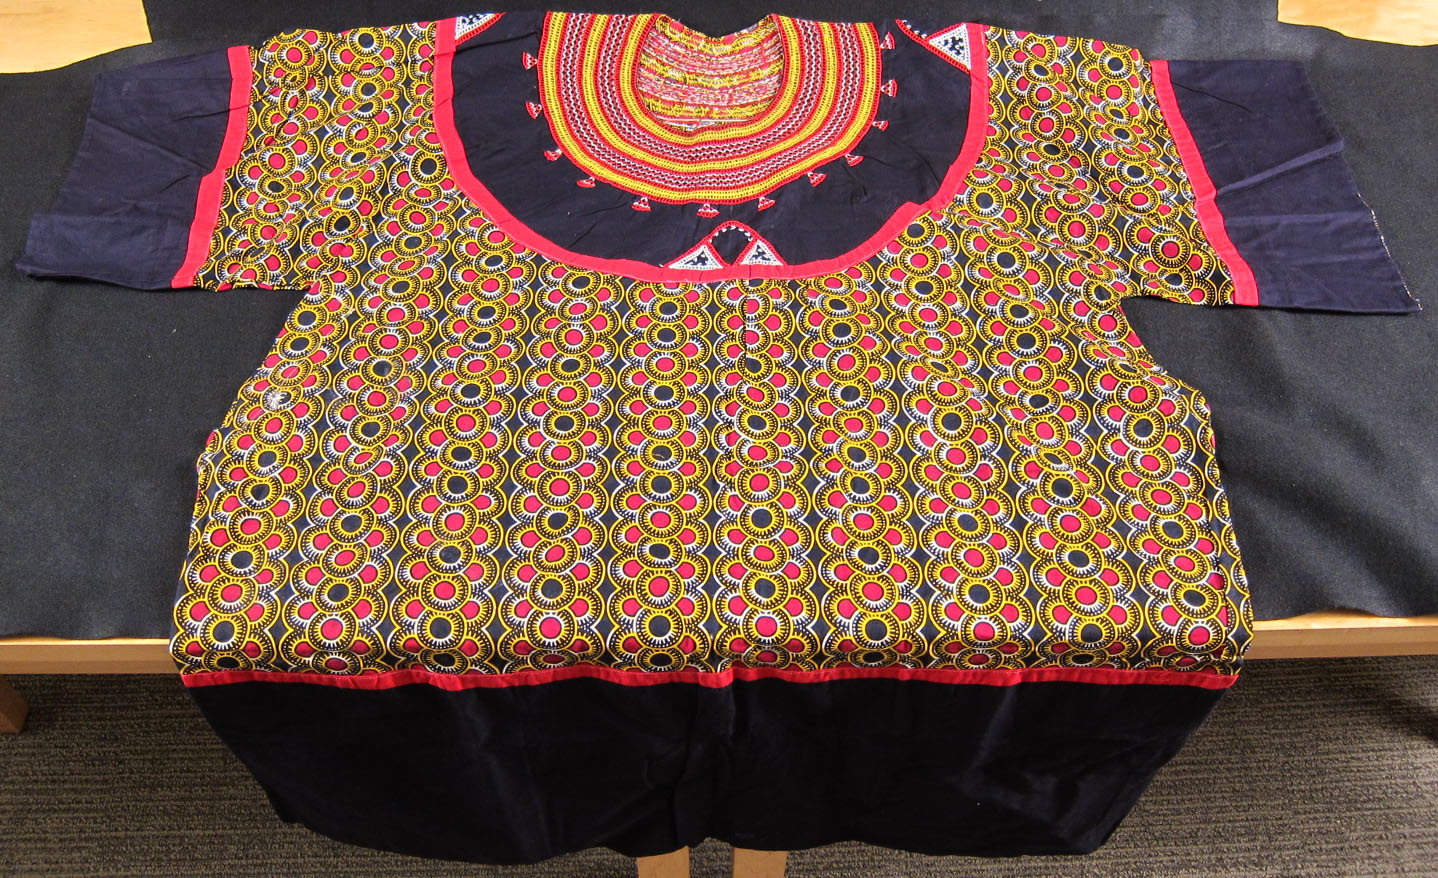 Clothing from Cameroon | Dickinson College